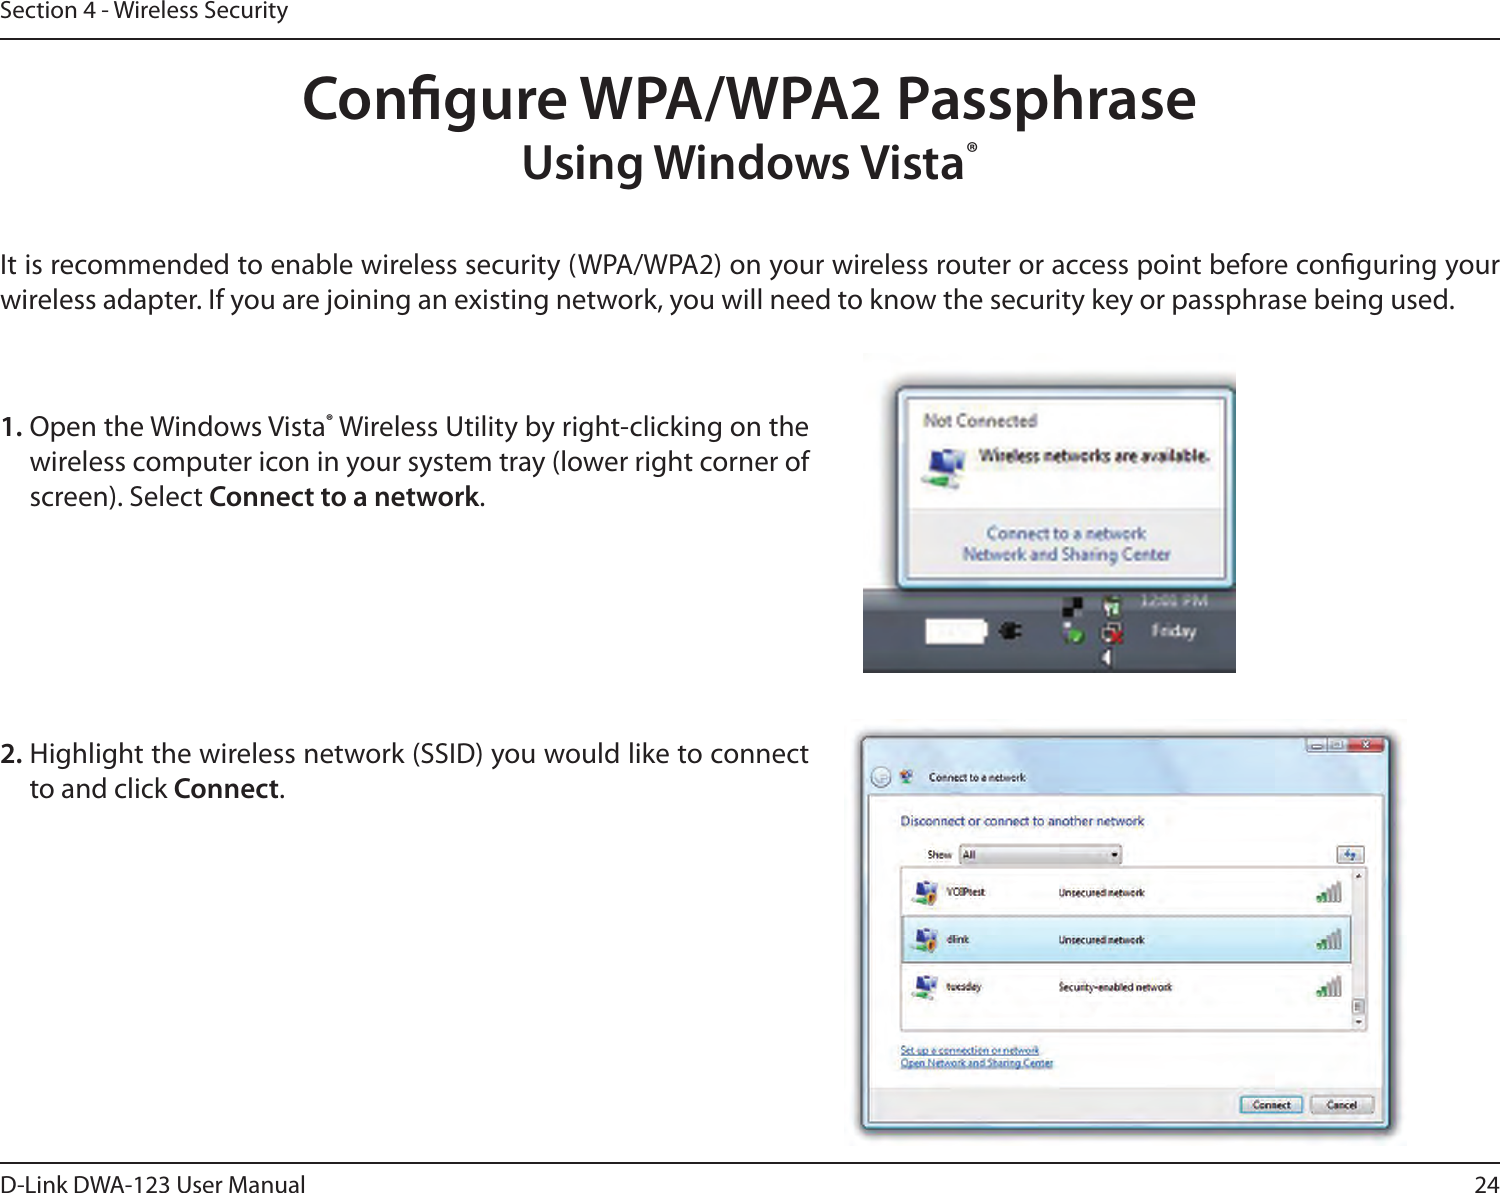 24D-Link DWA-123 User ManualSection 4 - Wireless SecurityCongure WPA/WPA2 PassphraseUsing Windows Vista® It is recommended to enable wireless security (WPA/WPA2) on your wireless router or access point before conguring your wireless adapter. If you are joining an existing network, you will need to know the security key or passphrase being used.2. Highlight the wireless network (SSID) you would like to connect to and click Connect.1. Open the Windows Vista® Wireless Utility by right-clicking on the wireless computer icon in your system tray (lower right corner of screen). Select Connect to a network. 